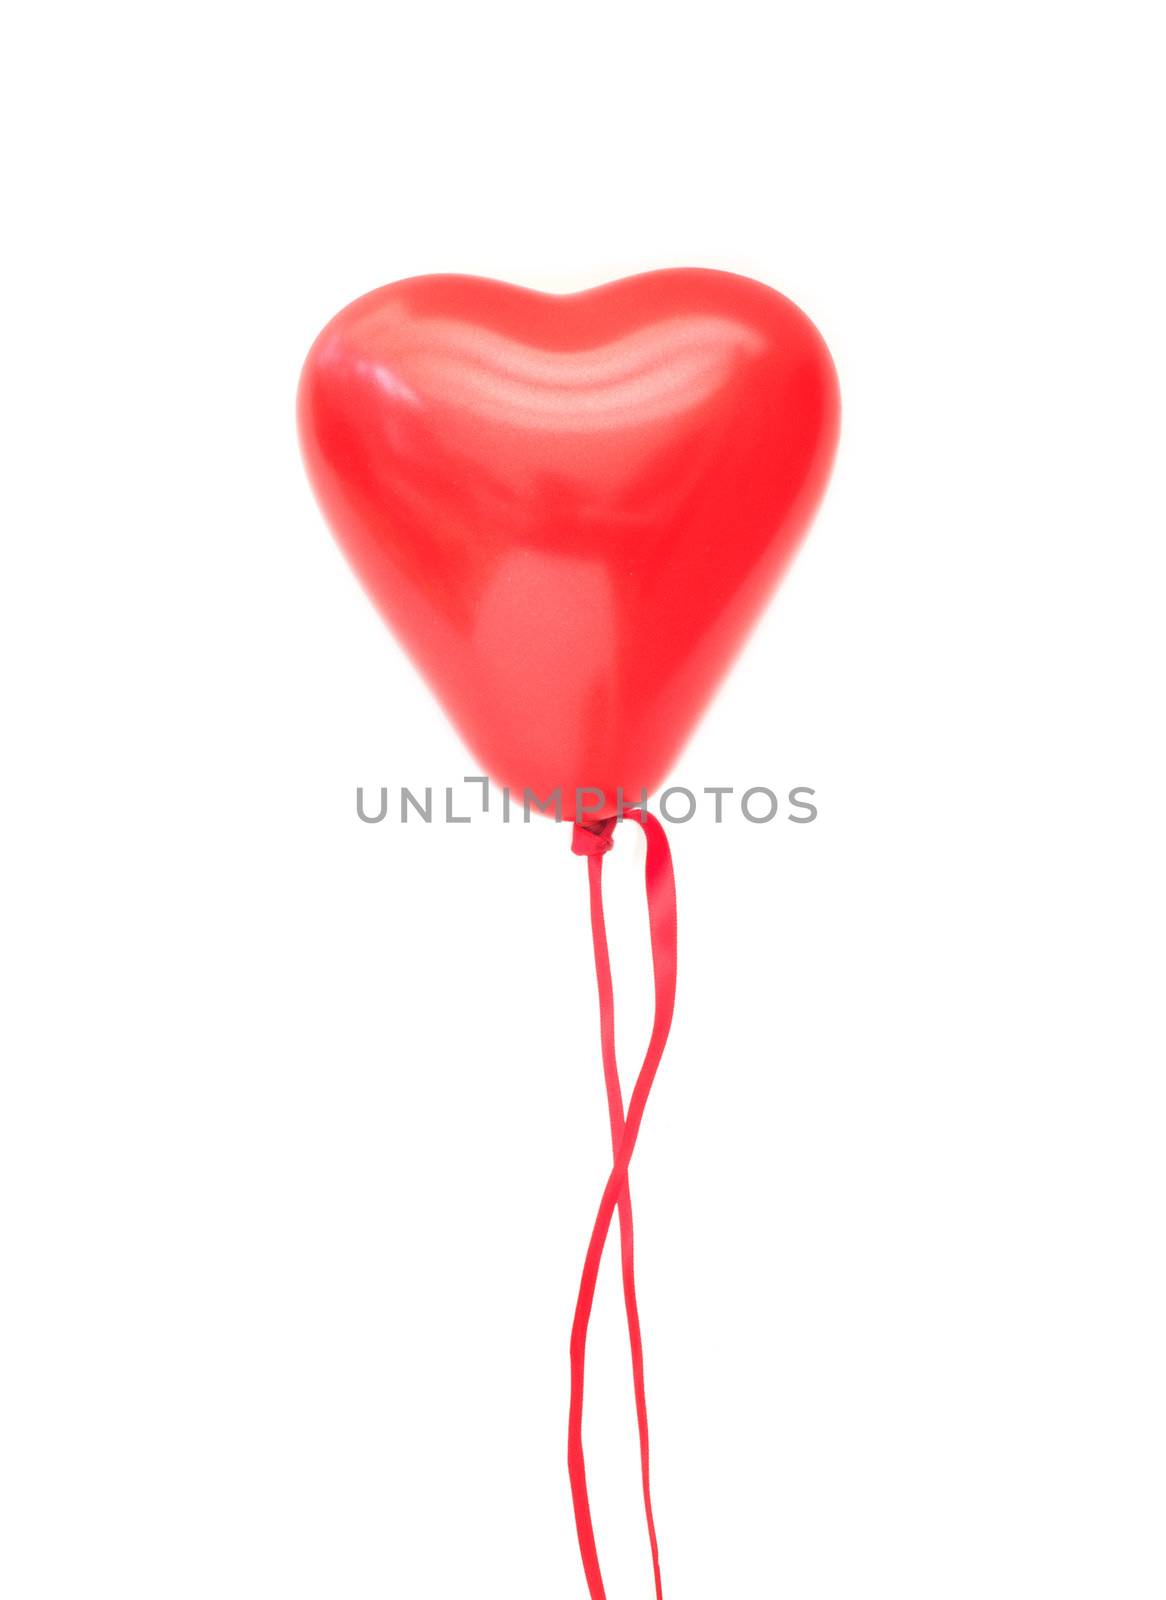 Red heart shaped floating air balloon over a white background